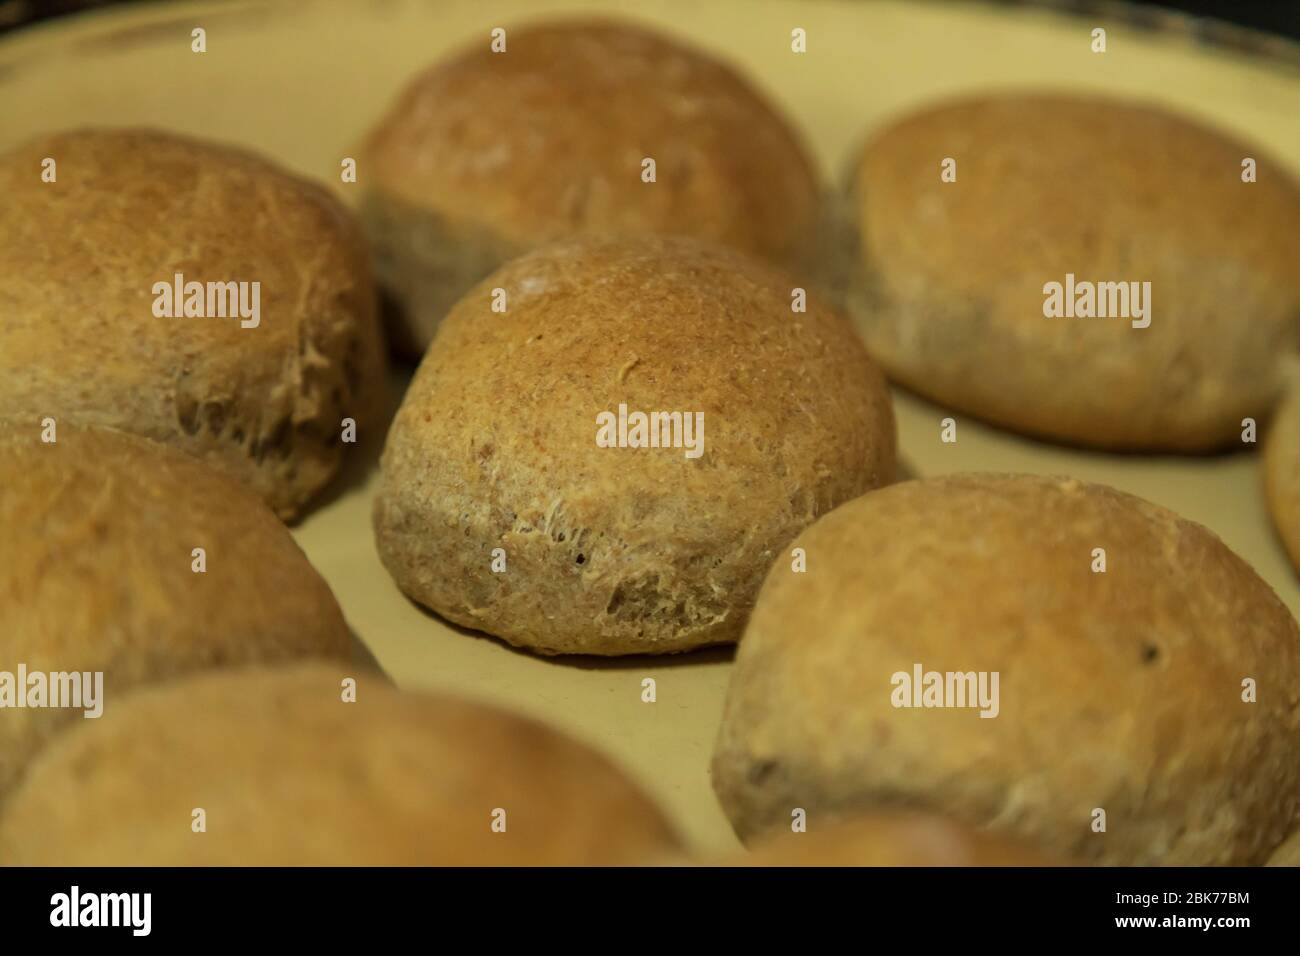 freshly baked wheat bread rolls one the center of focus the rest out of focus Stock Photo